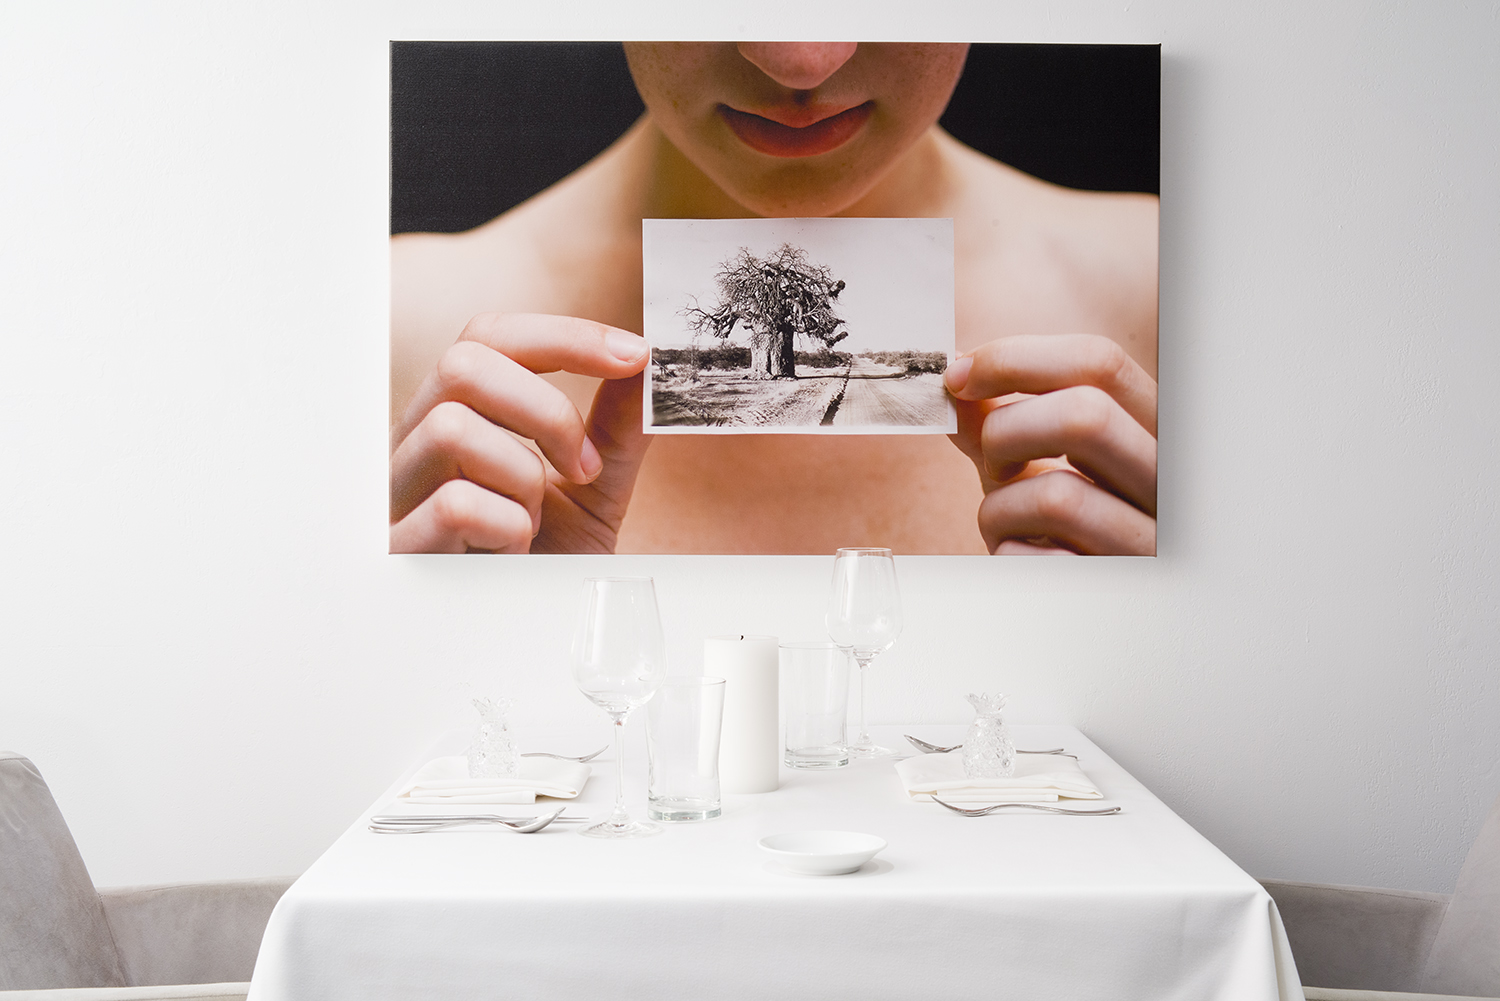 Installation View of The Progresssion, White dining room, one of 12 photographs